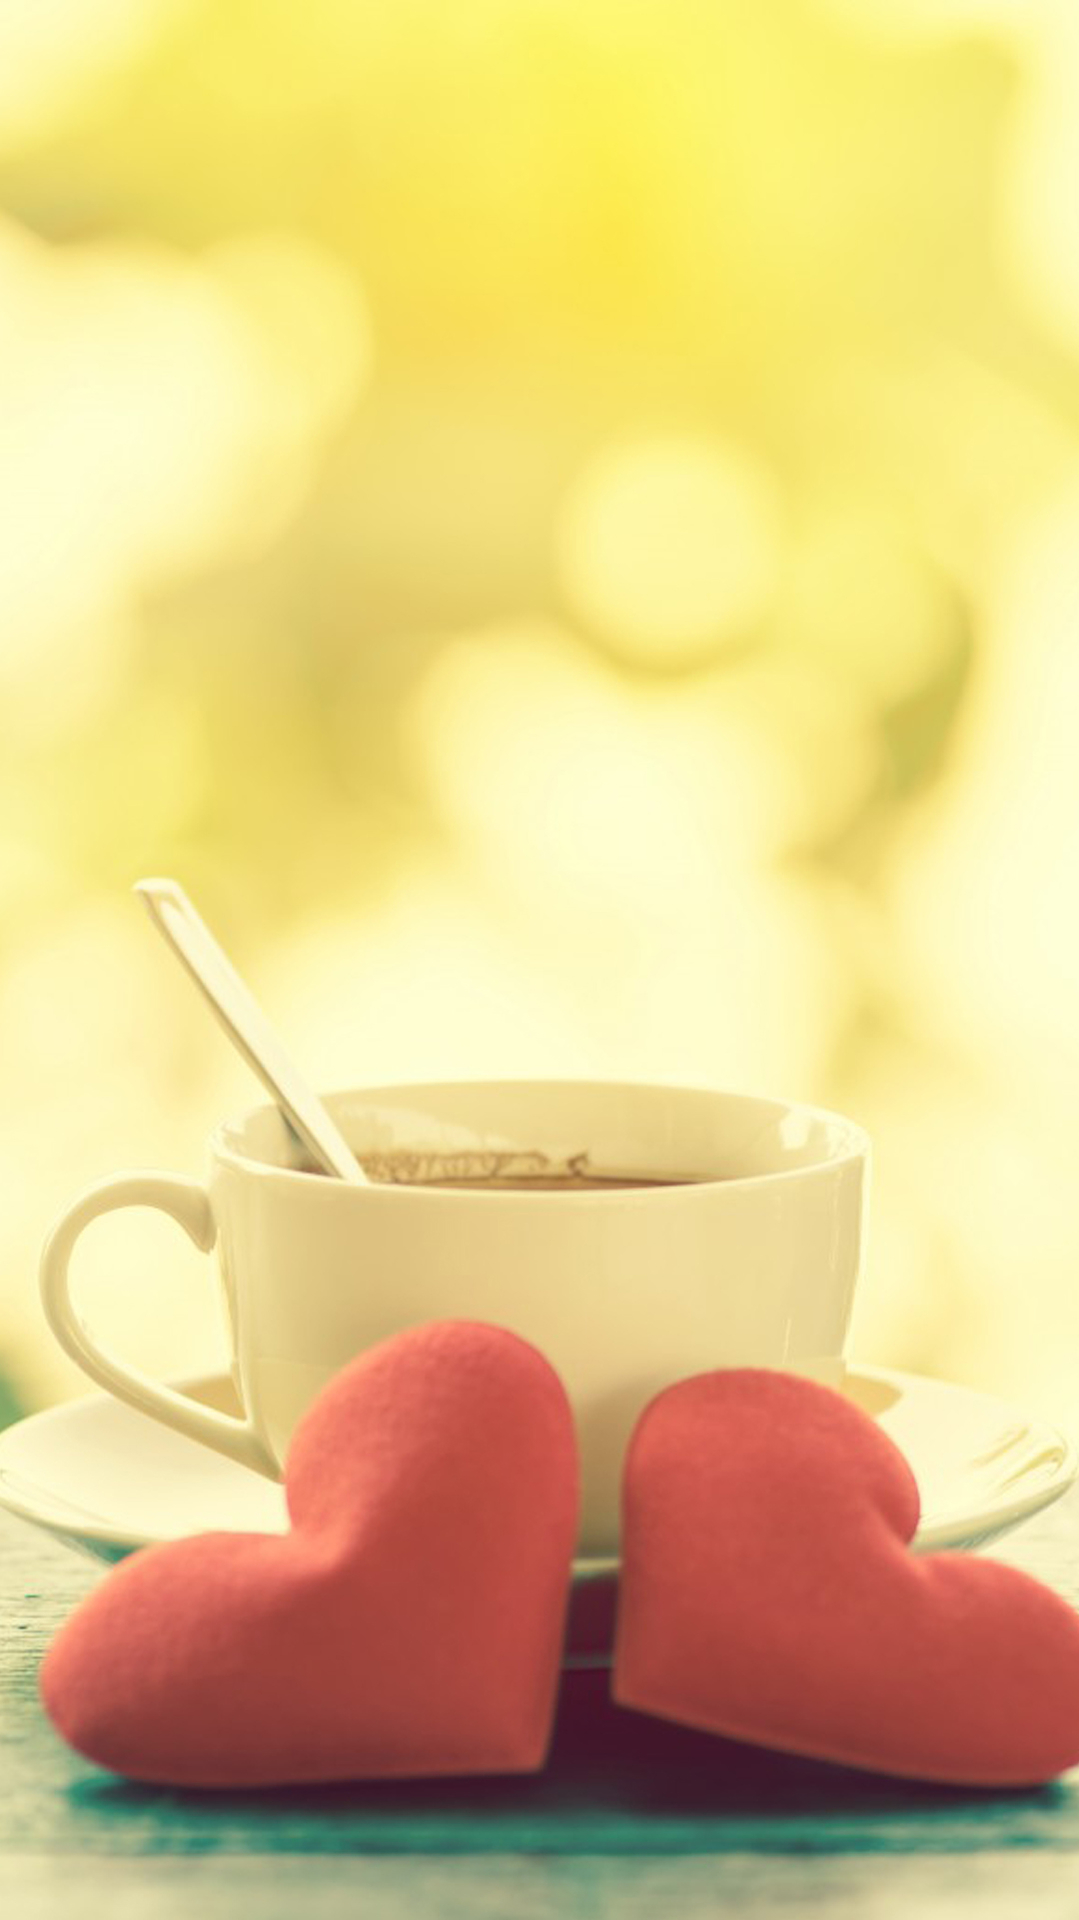 Warm Love Coffee Iphone 6 / 6 Plus And Iphone 5/4 Wallpapers - Clock Love - HD Wallpaper 